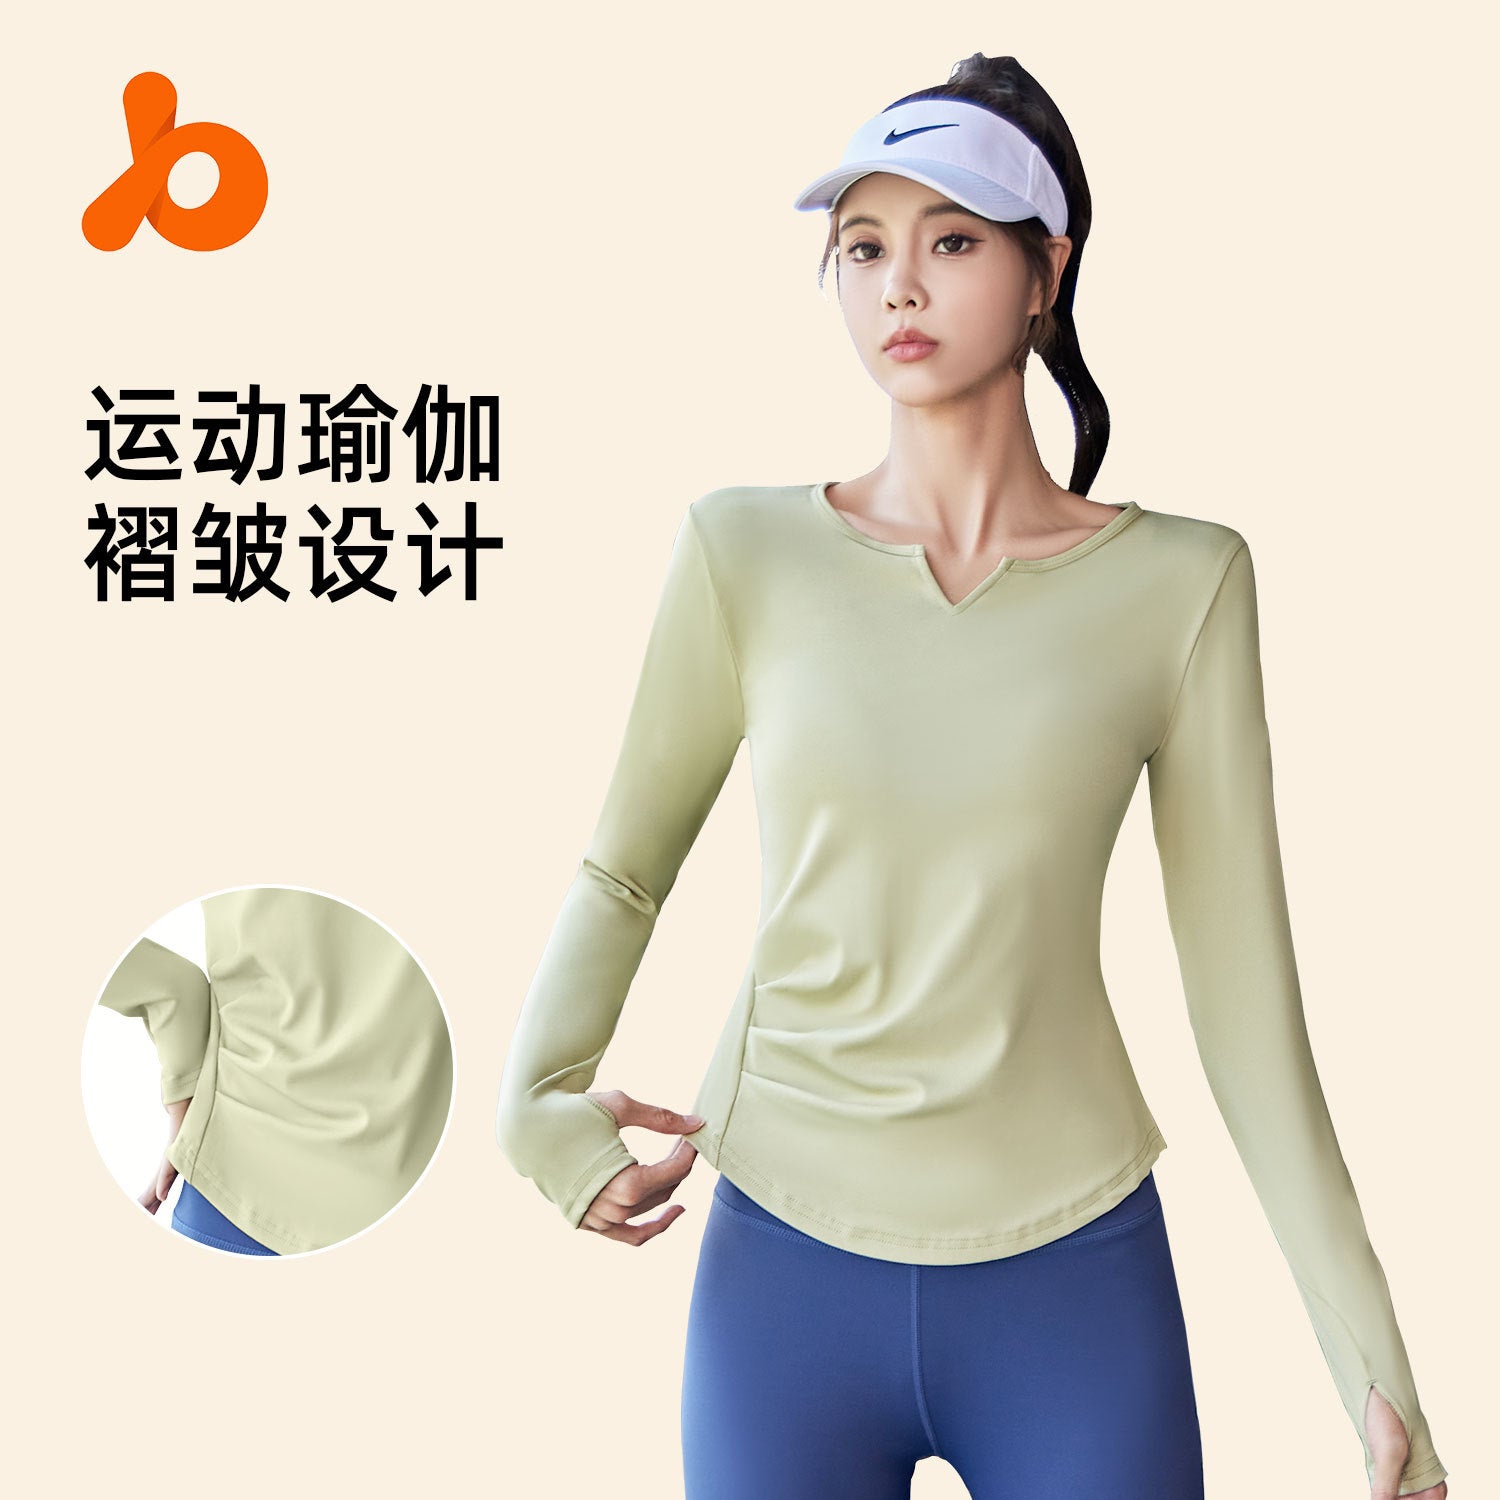 Juyitang V-neck long sleeved quick drying and seamless yoga suit with pleats, waist reduction and slimming effect, tight fitting sports and fitness top